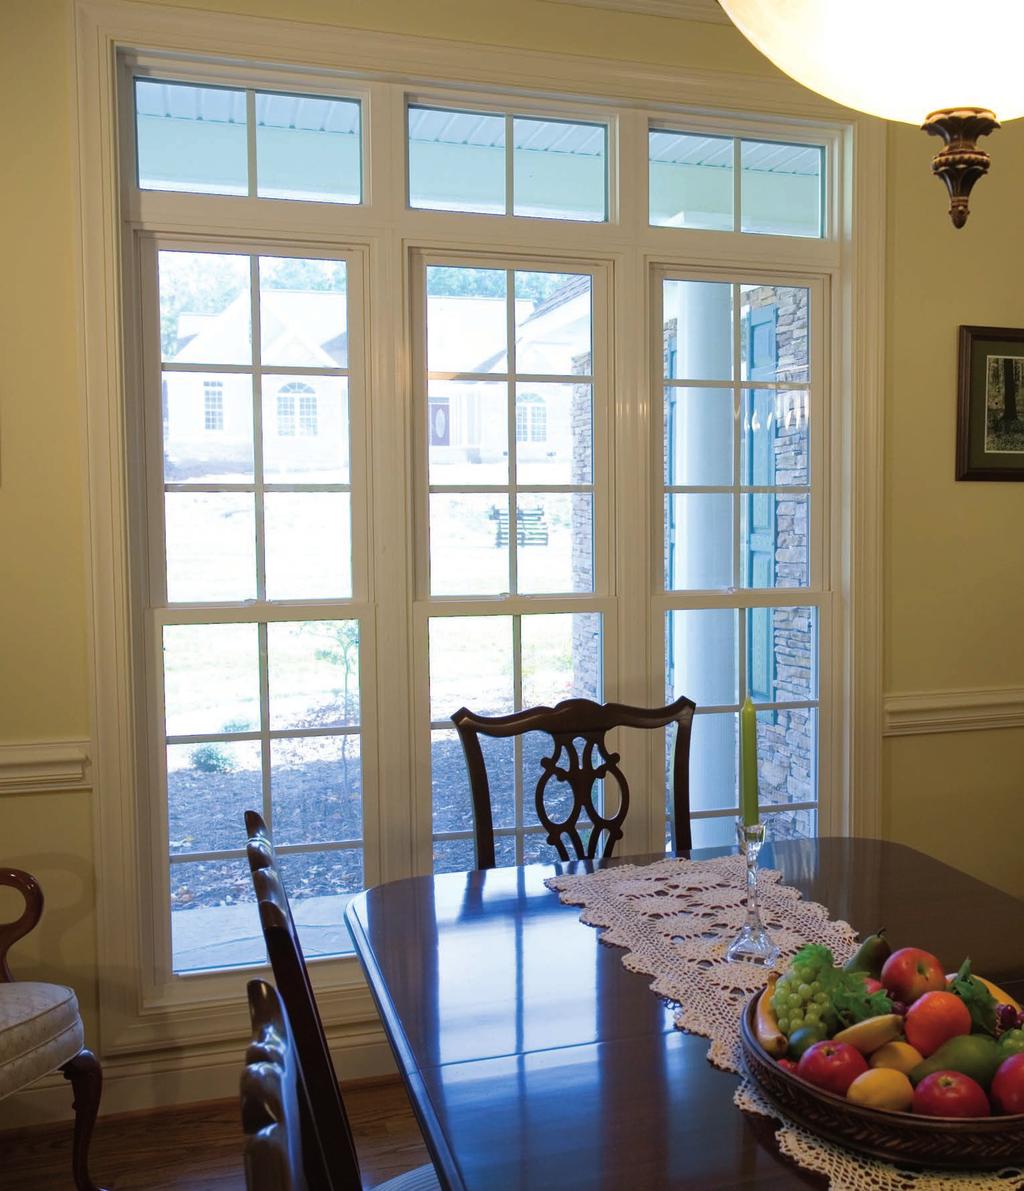 CLSSIC DOUBLE HUNG PRO SERIES CLSSIC DOUBLE HUNG windows help reflect your own personal